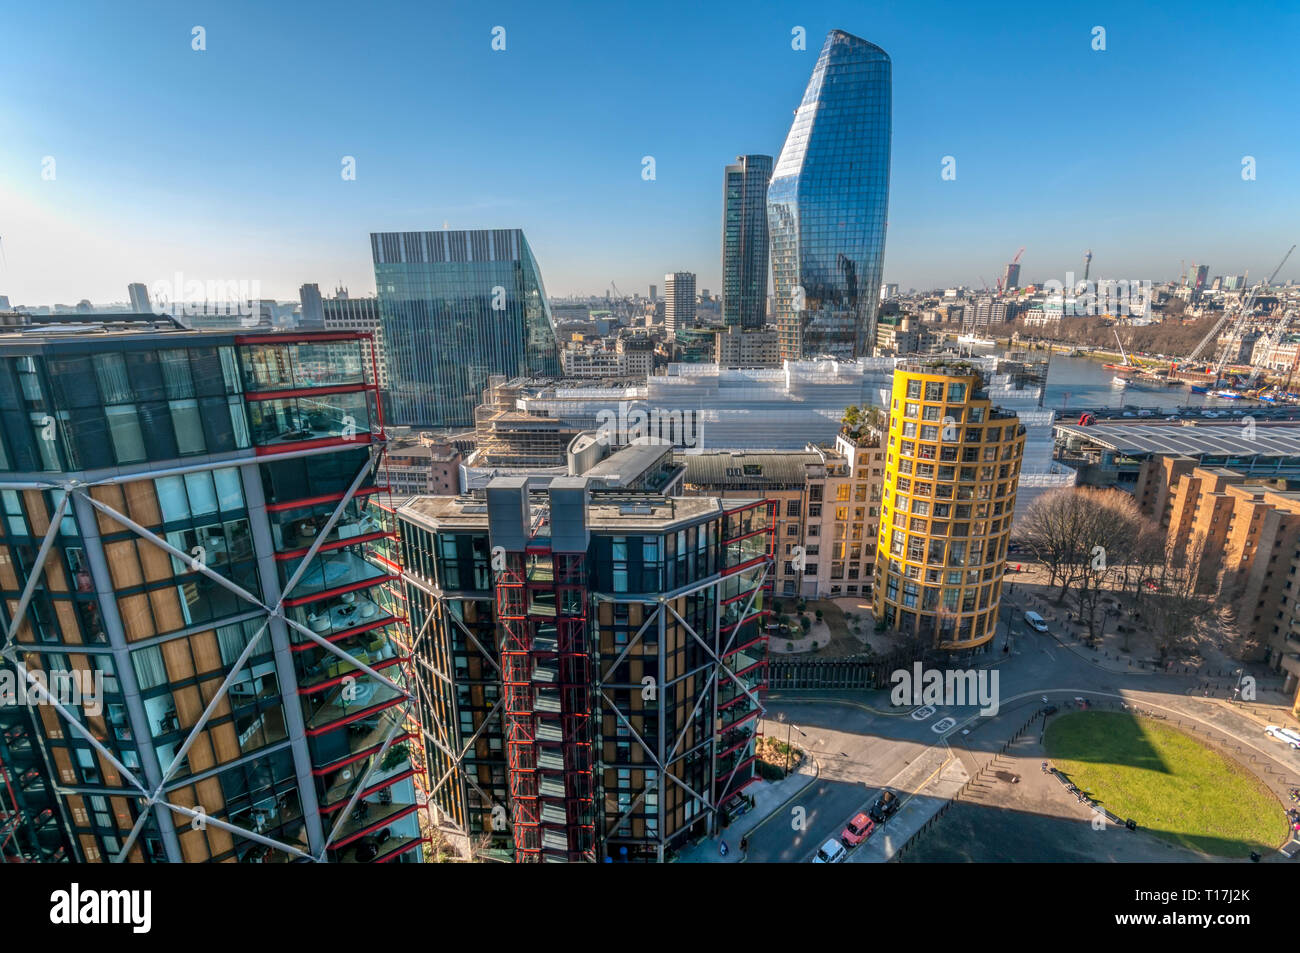 Neo Bankside, Bankside Lofts and the One Blackfriars tower on Bankside, South London. Stock Photo